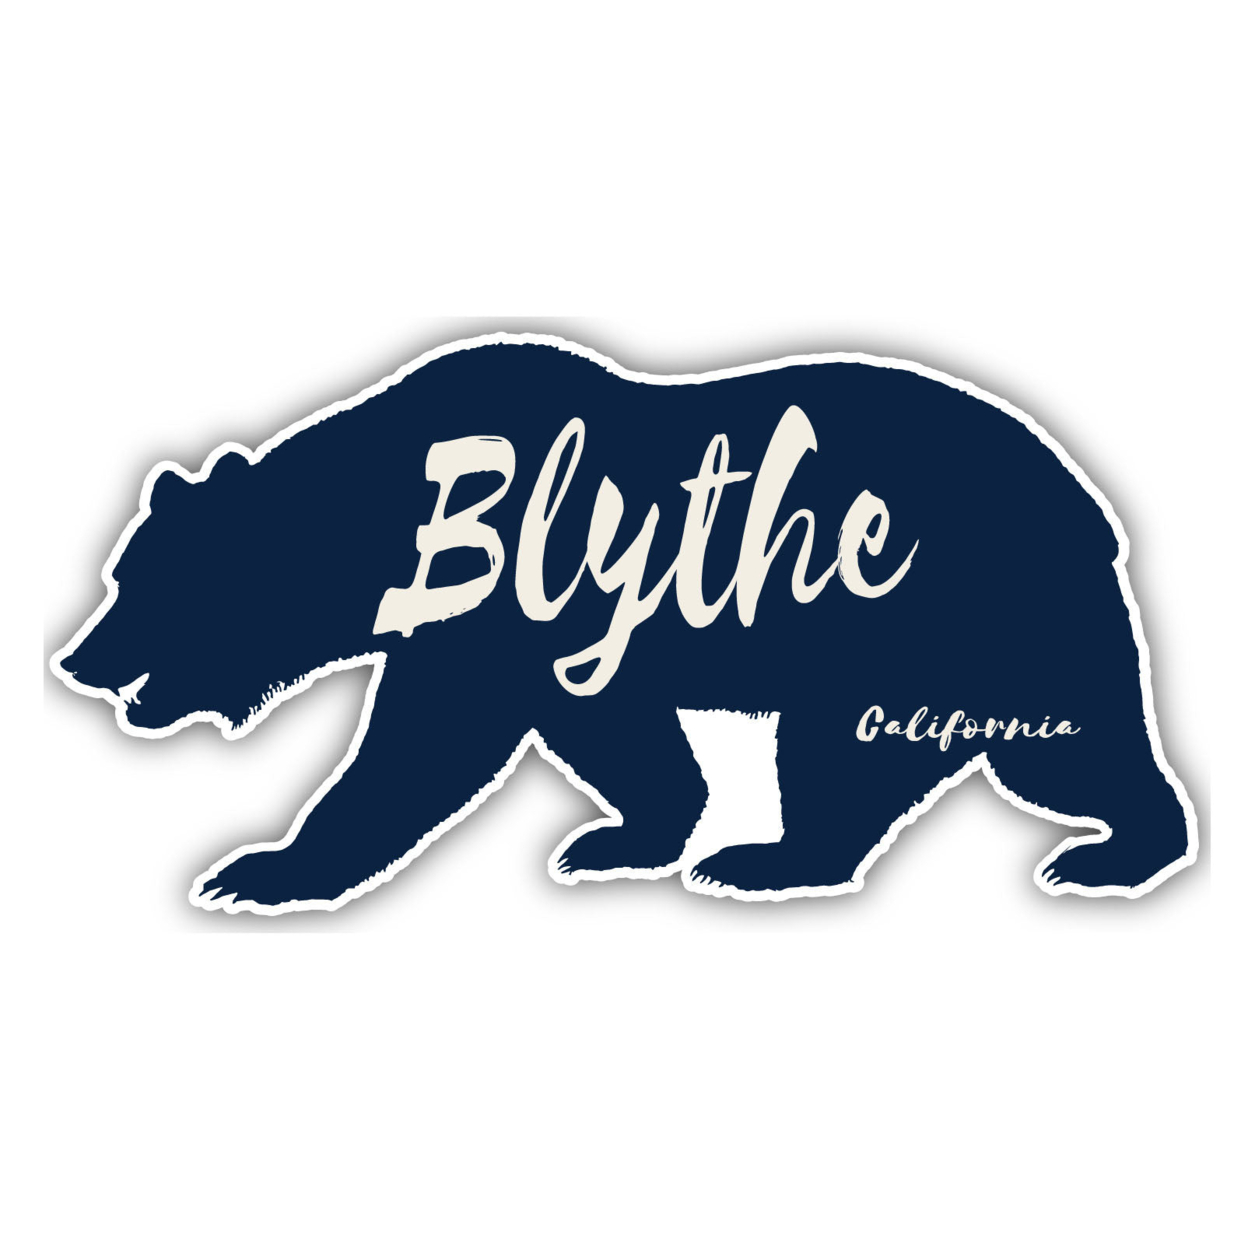 Blythe California Souvenir Decorative Stickers (Choose Theme And Size) - 4-Pack, 10-Inch, Bear